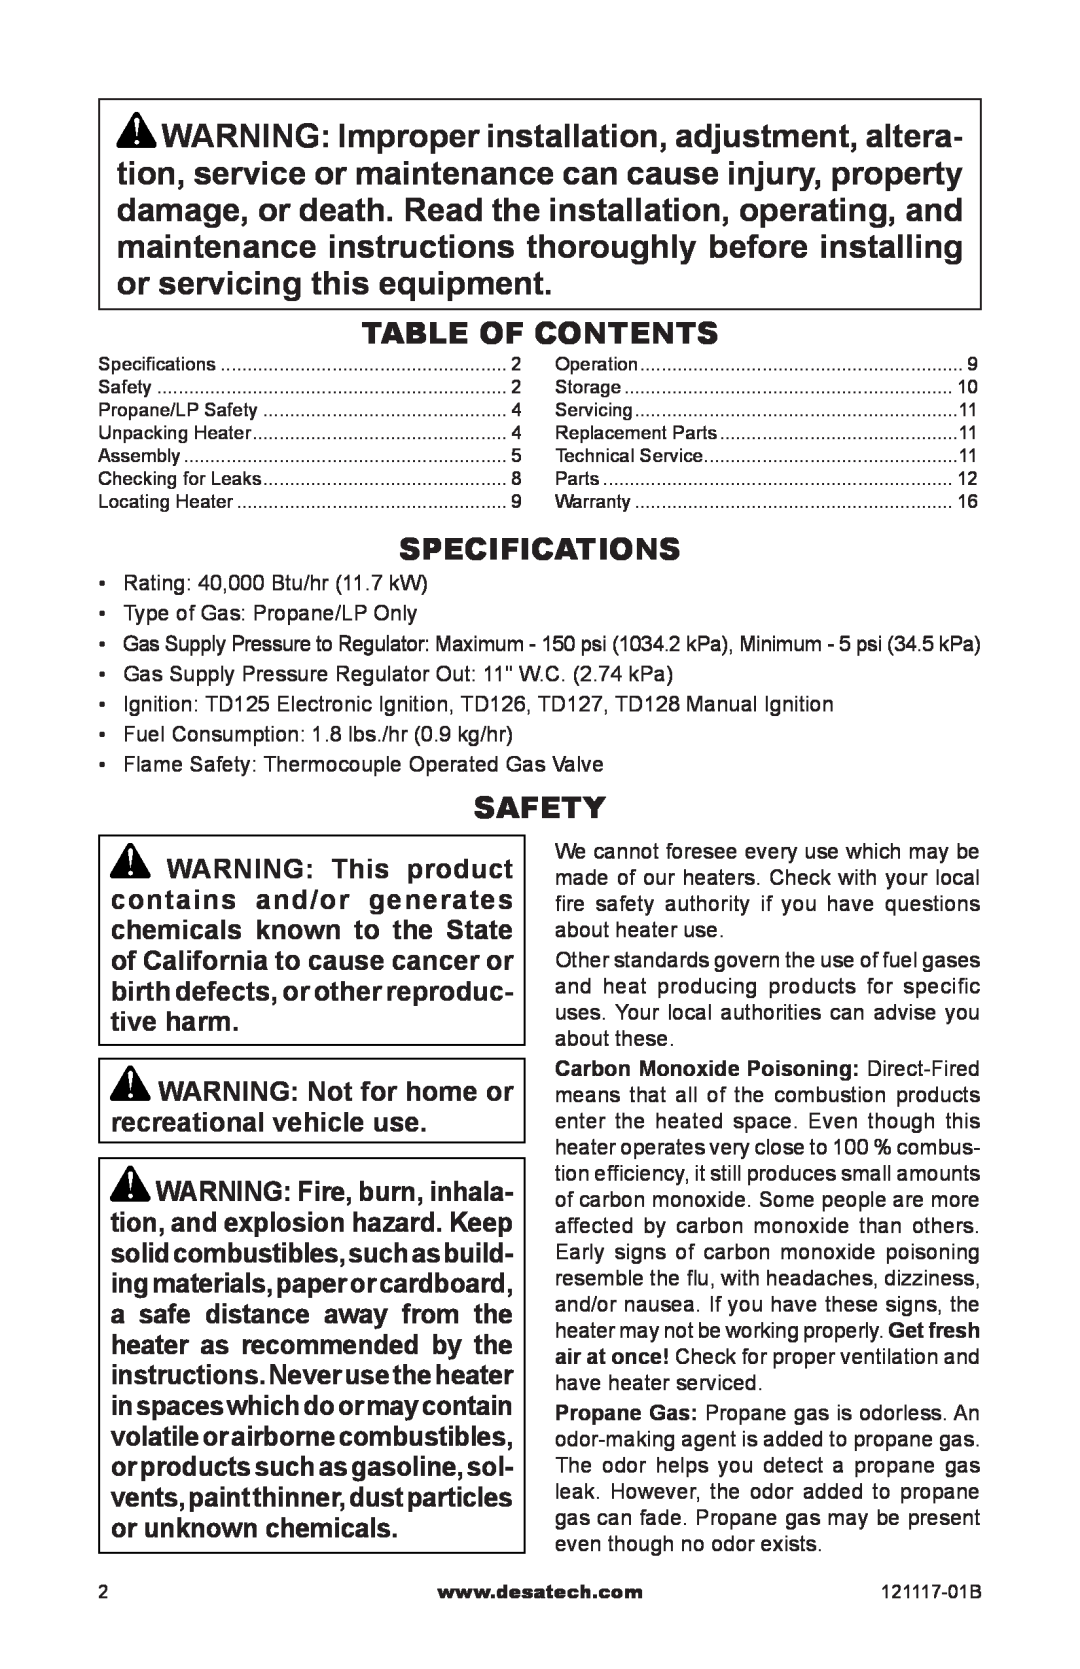 Desa Td125, Td126, Td127, Td128 owner manual Table of Contents, Specifications, Safety 